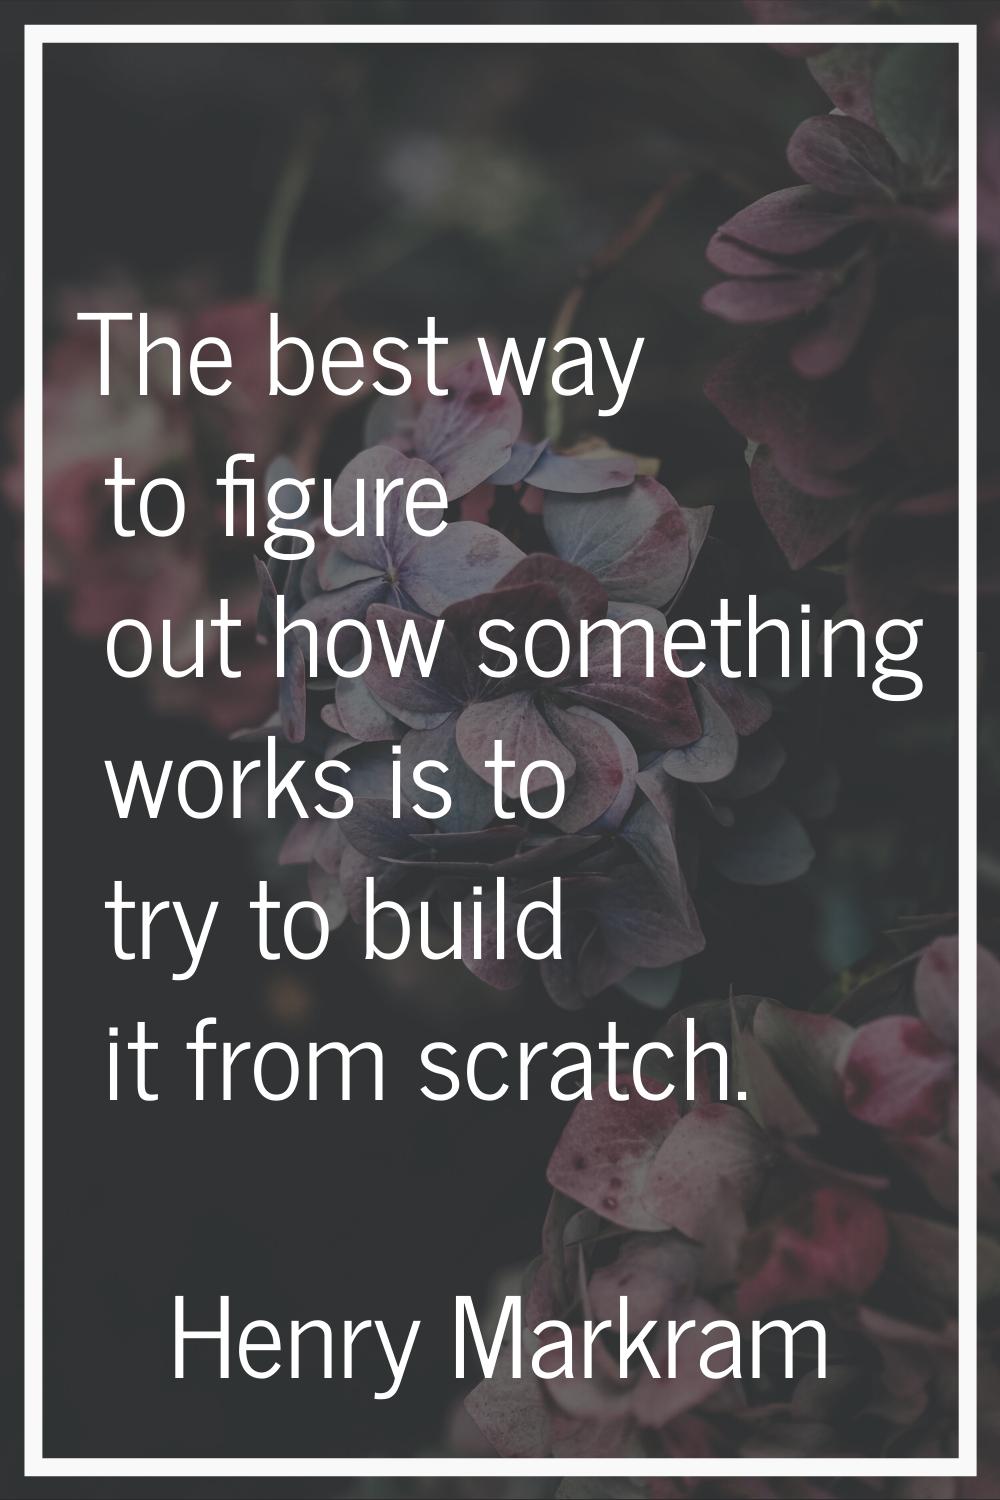 The best way to figure out how something works is to try to build it from scratch.